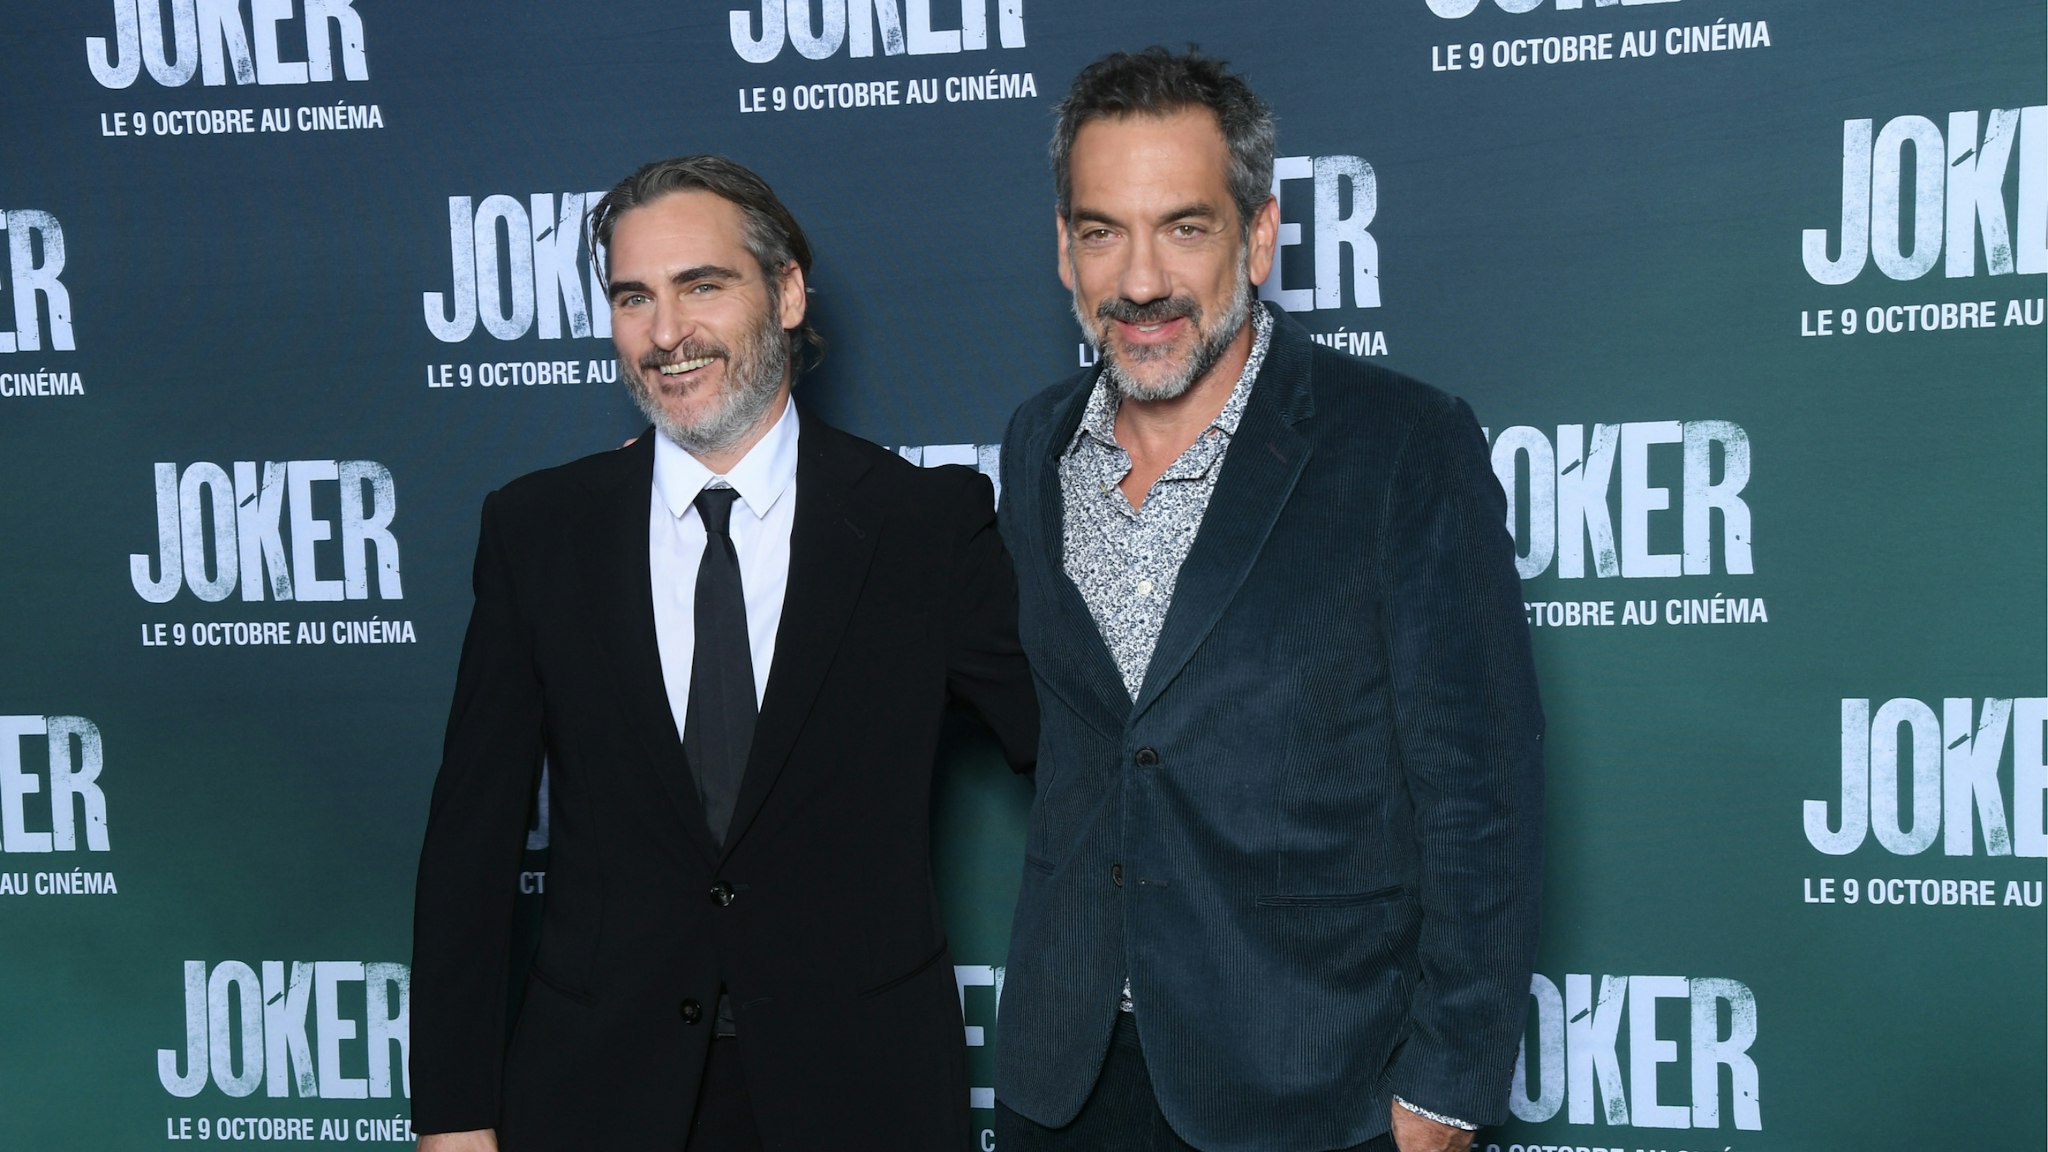 Actor Joaquin Phoenix and Director Todd Phillips attend the "Joker" Premiere at cinema UGC Normandie son September 23, 2019 in Paris, France.